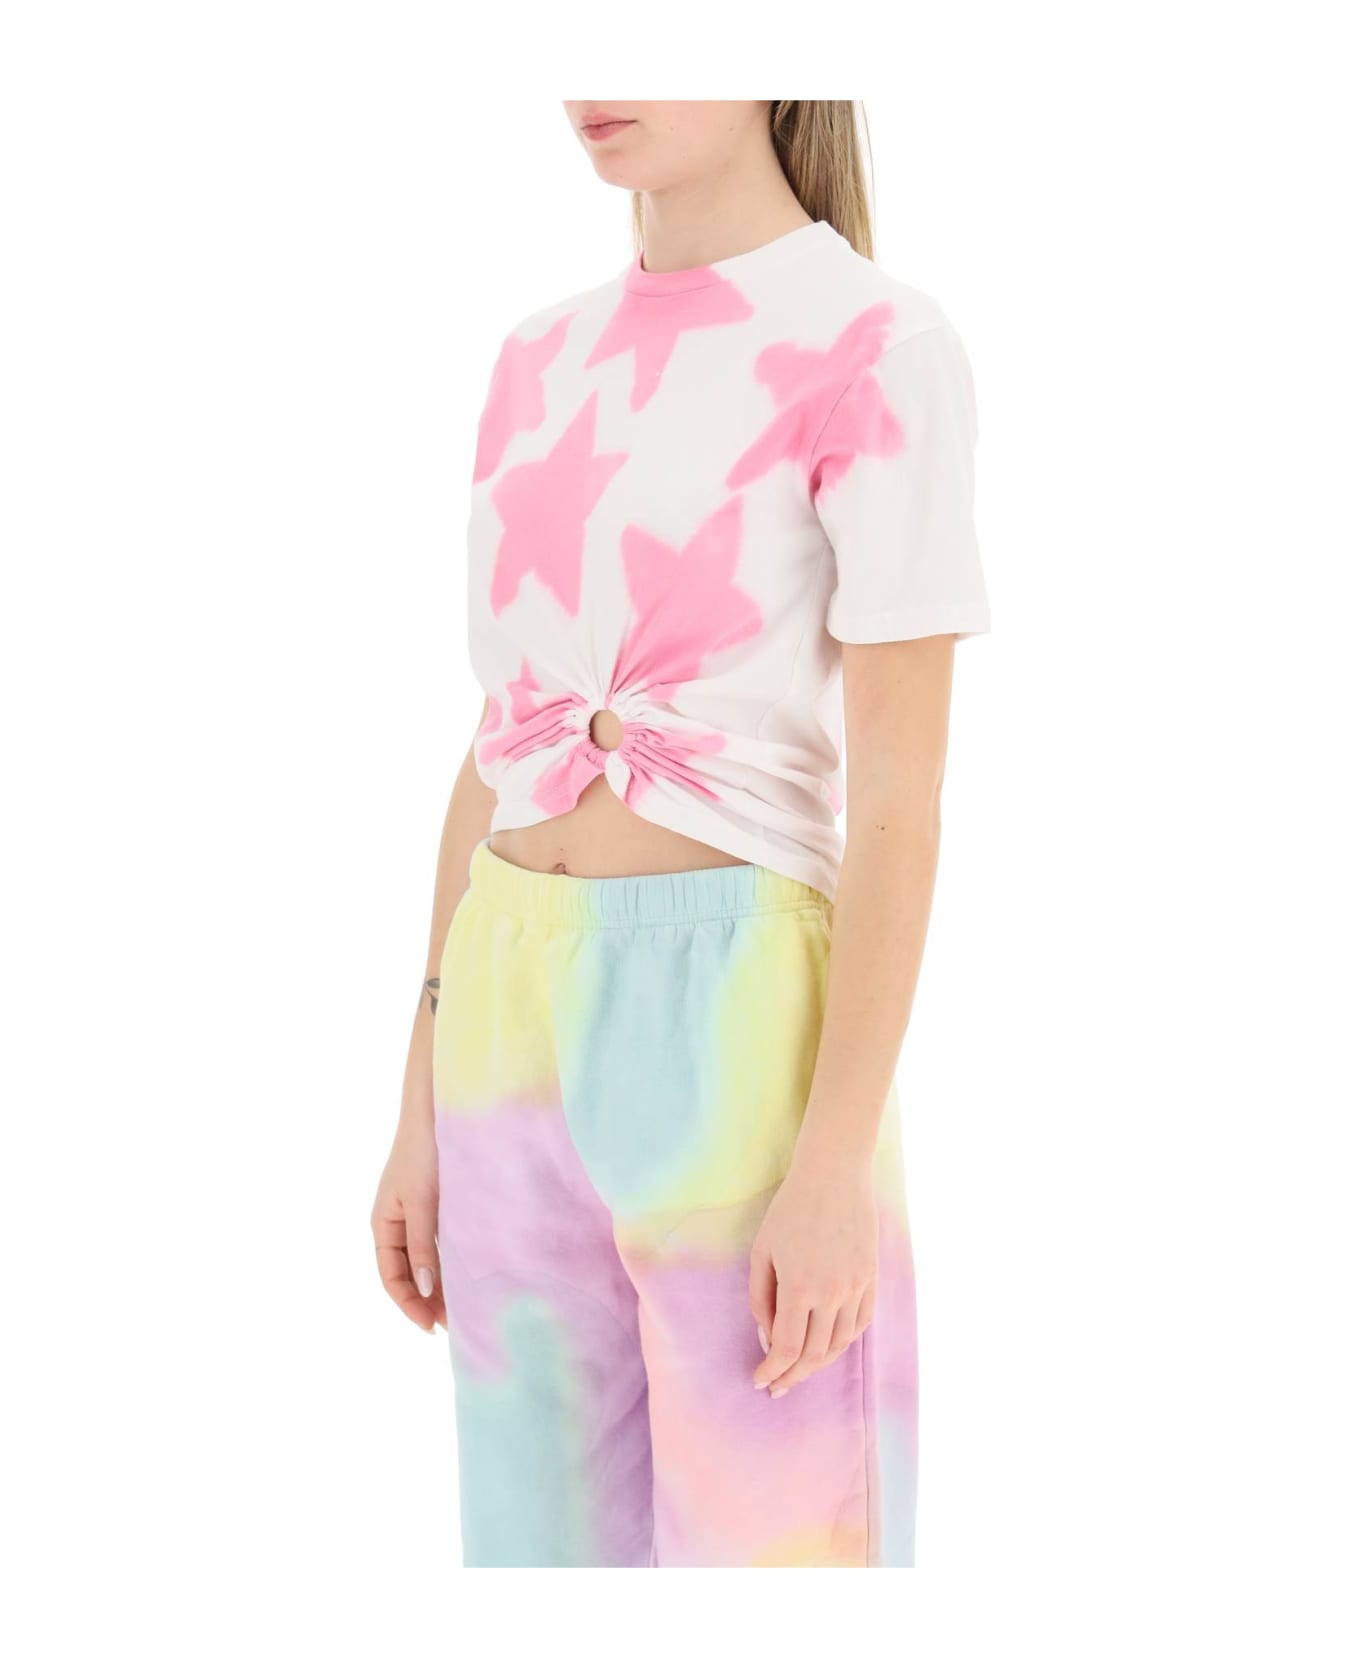 Collina Strada Tie-dye Star T-shirt With O-ring Detail - PINK STAR (White)